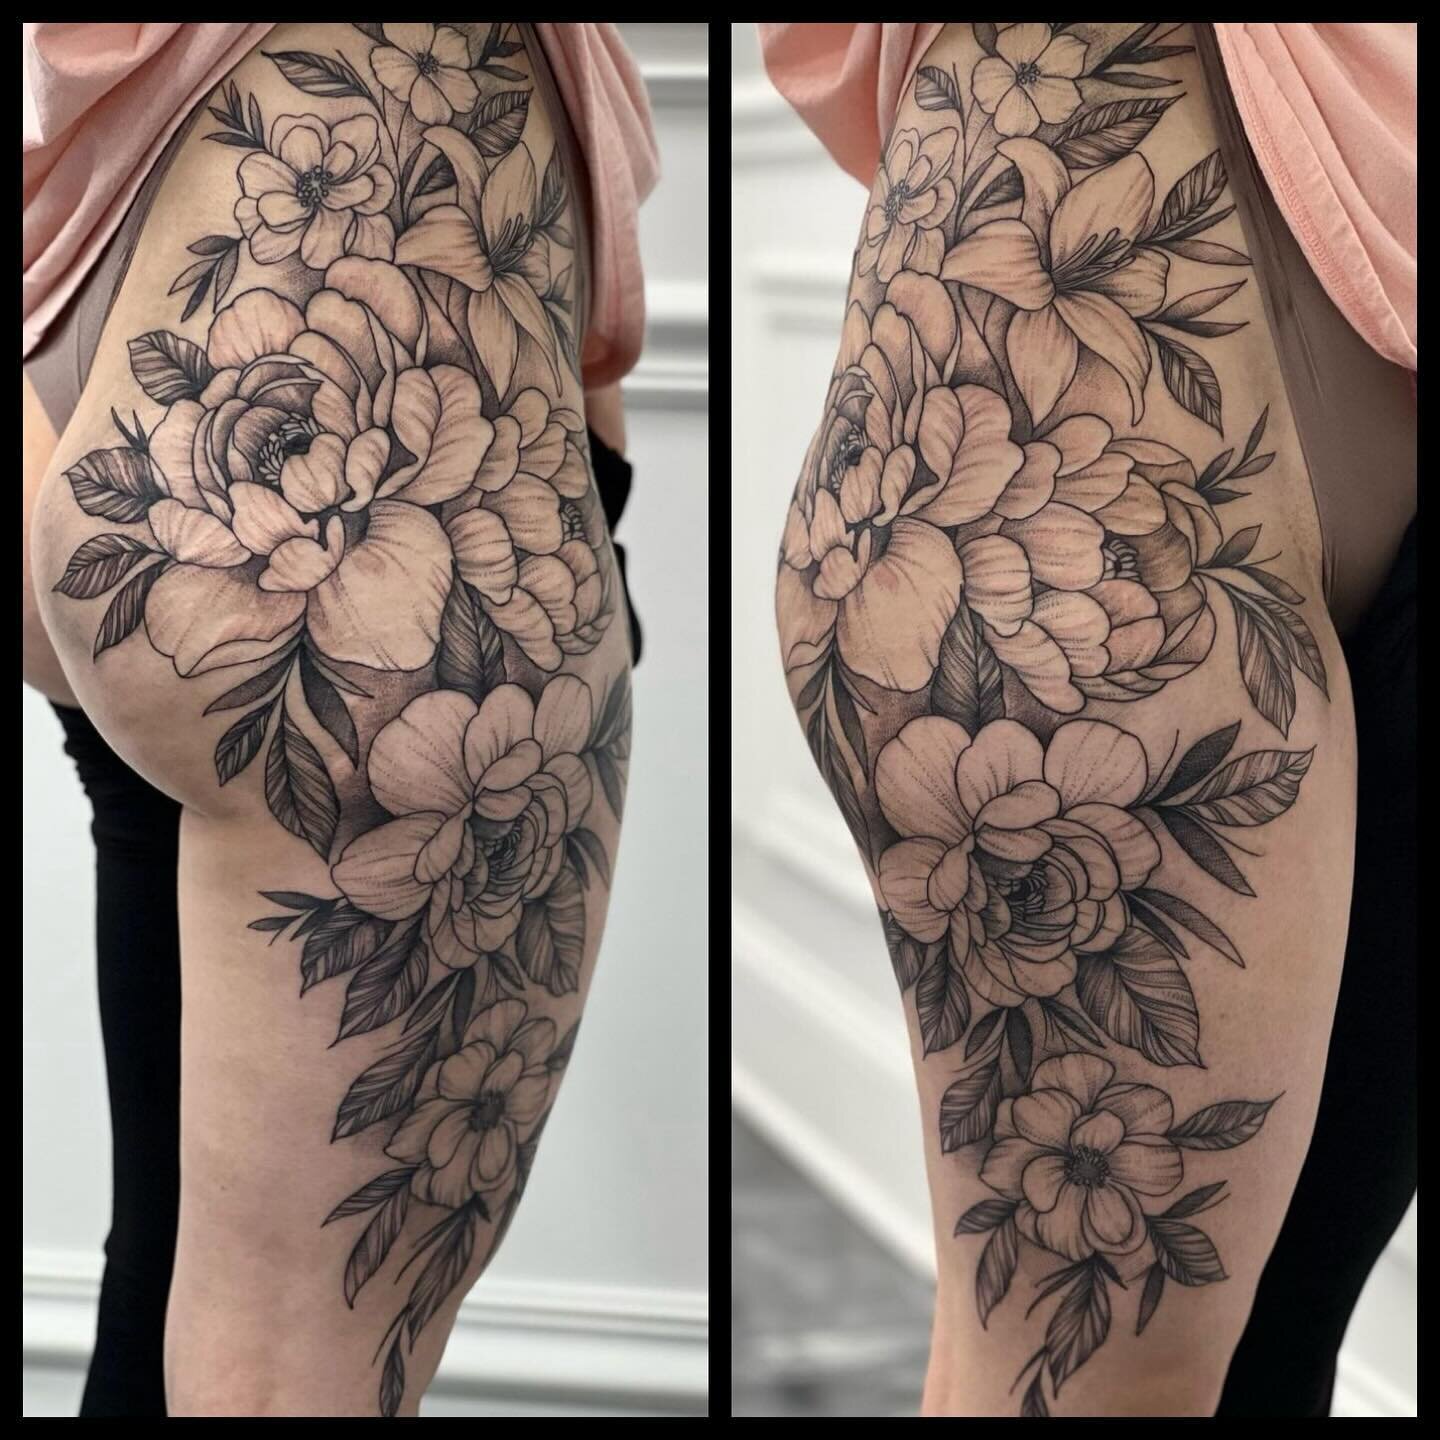 Phenomenal floral piece done by George! For scheduling, please email him at George.jacqueztattoos@yahoo.com or stop in the shop anyway except Thursdays and Sundays. Thanks!